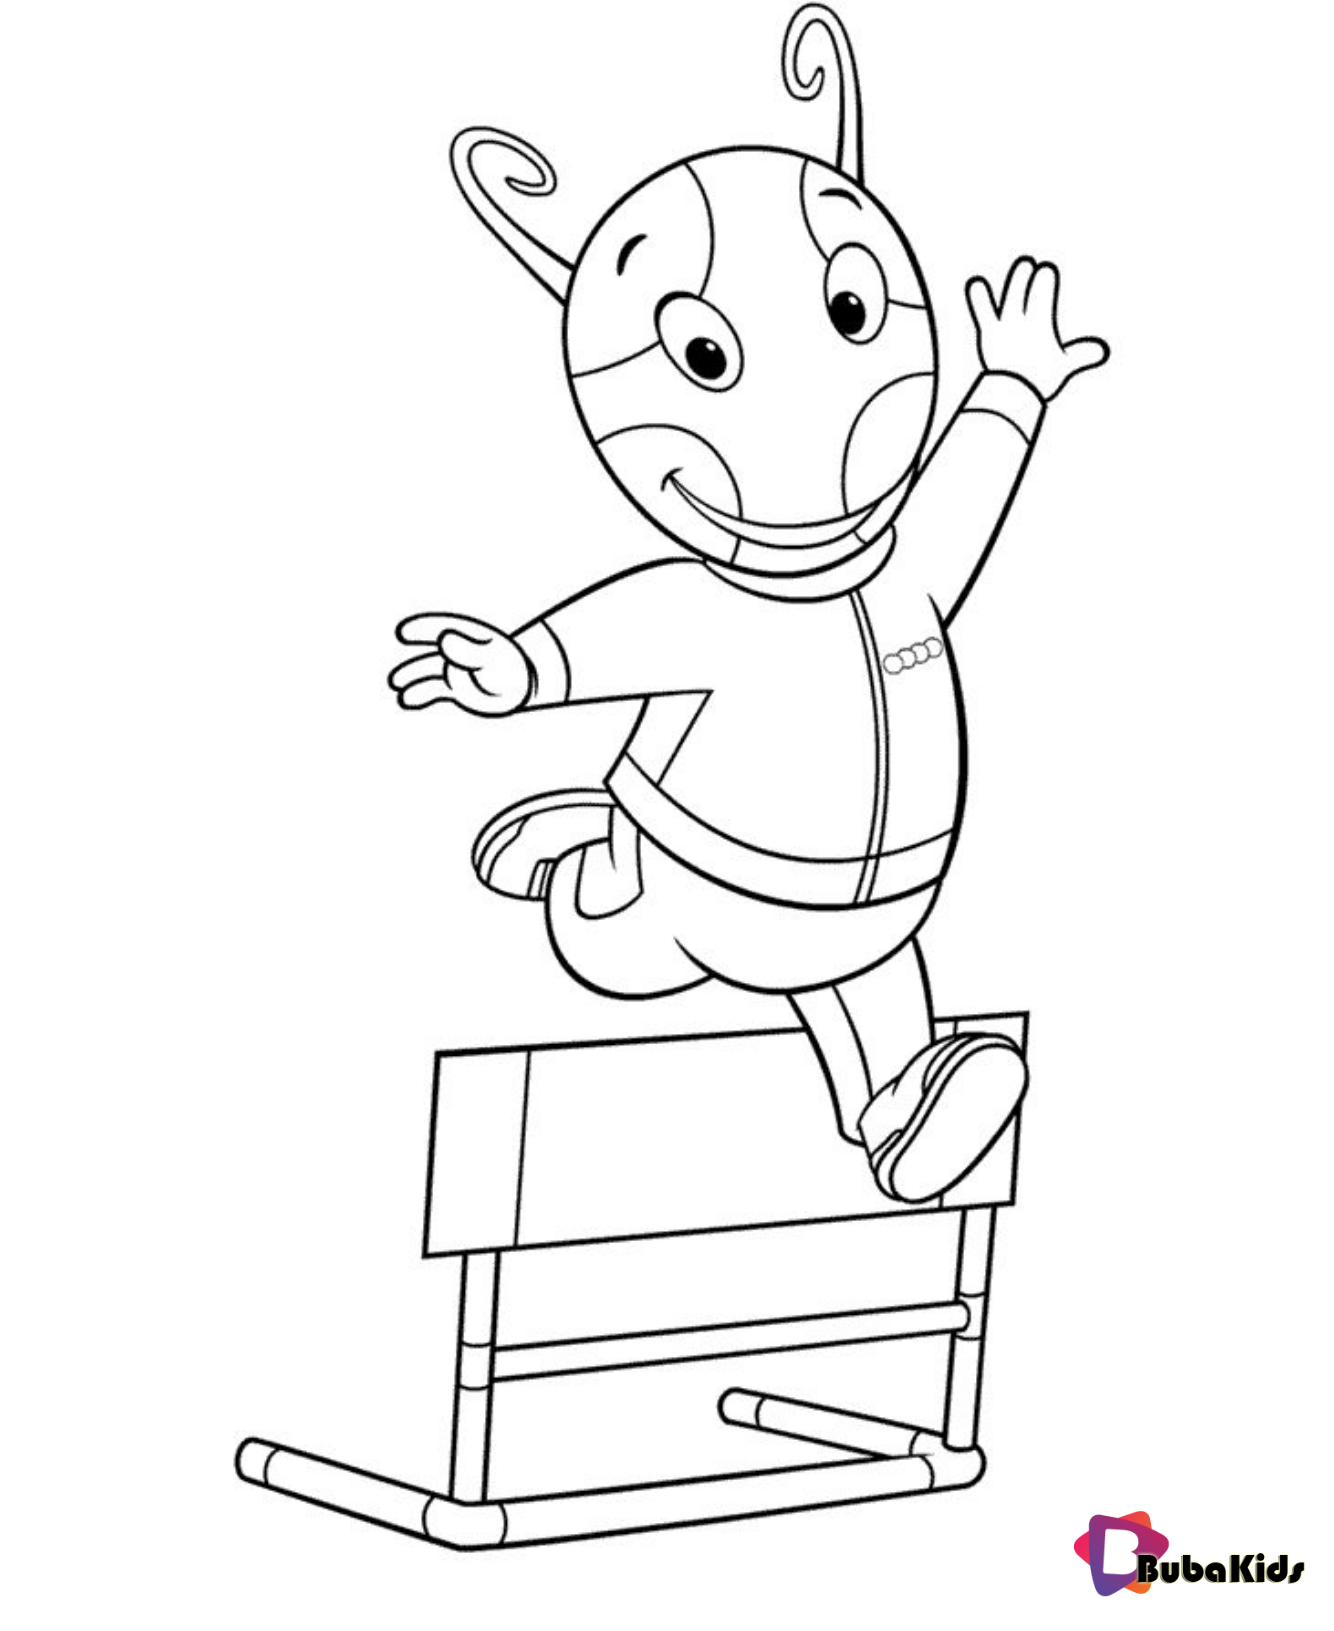 Backyardigans Coloring Pages for kids free Wallpaper